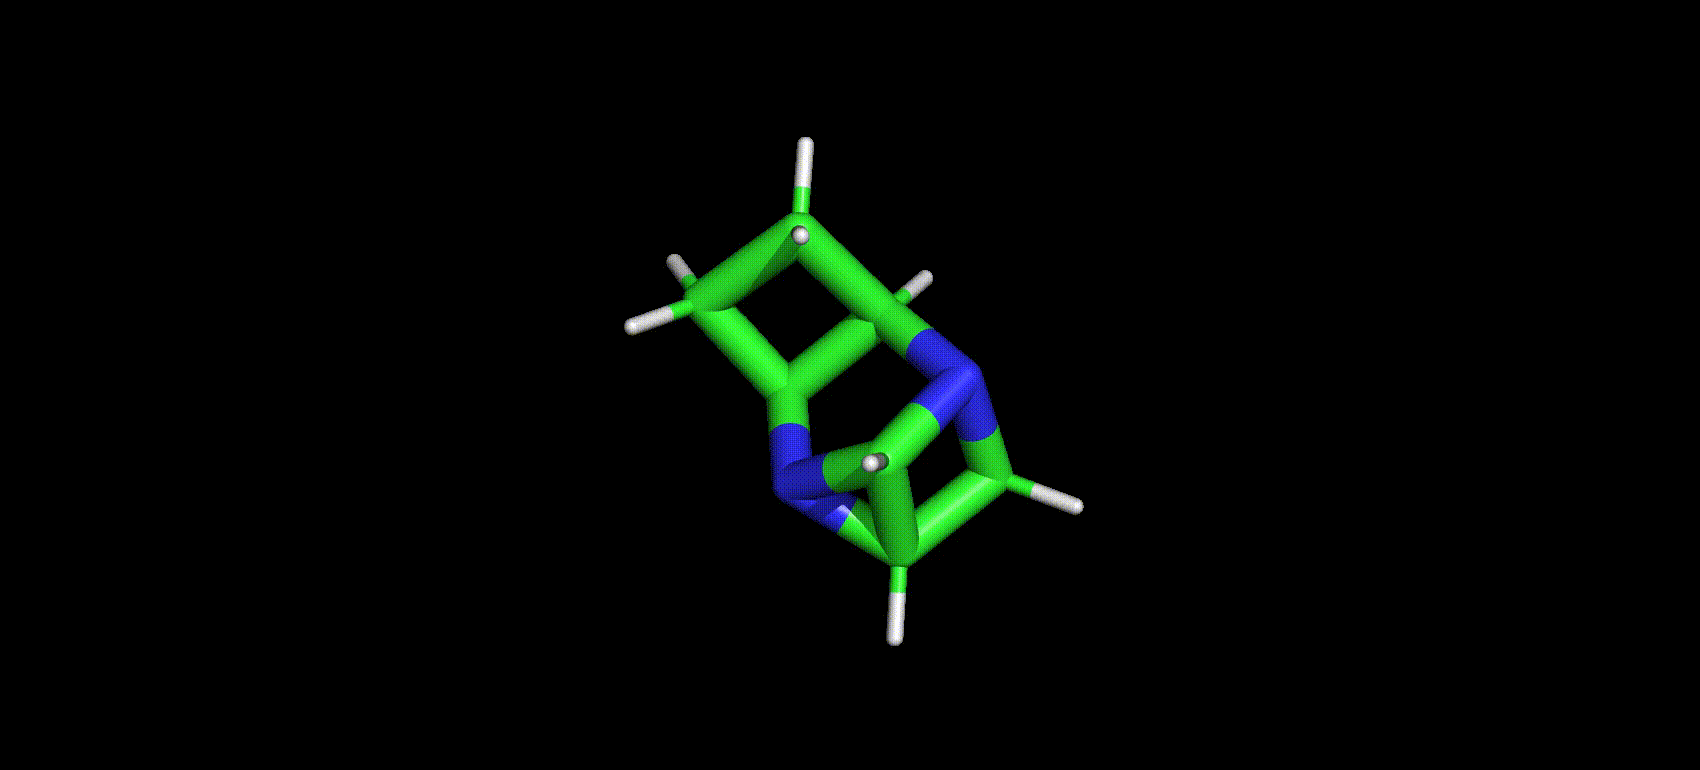 Animation of diffusion model-generated 3D molecules visualized successively